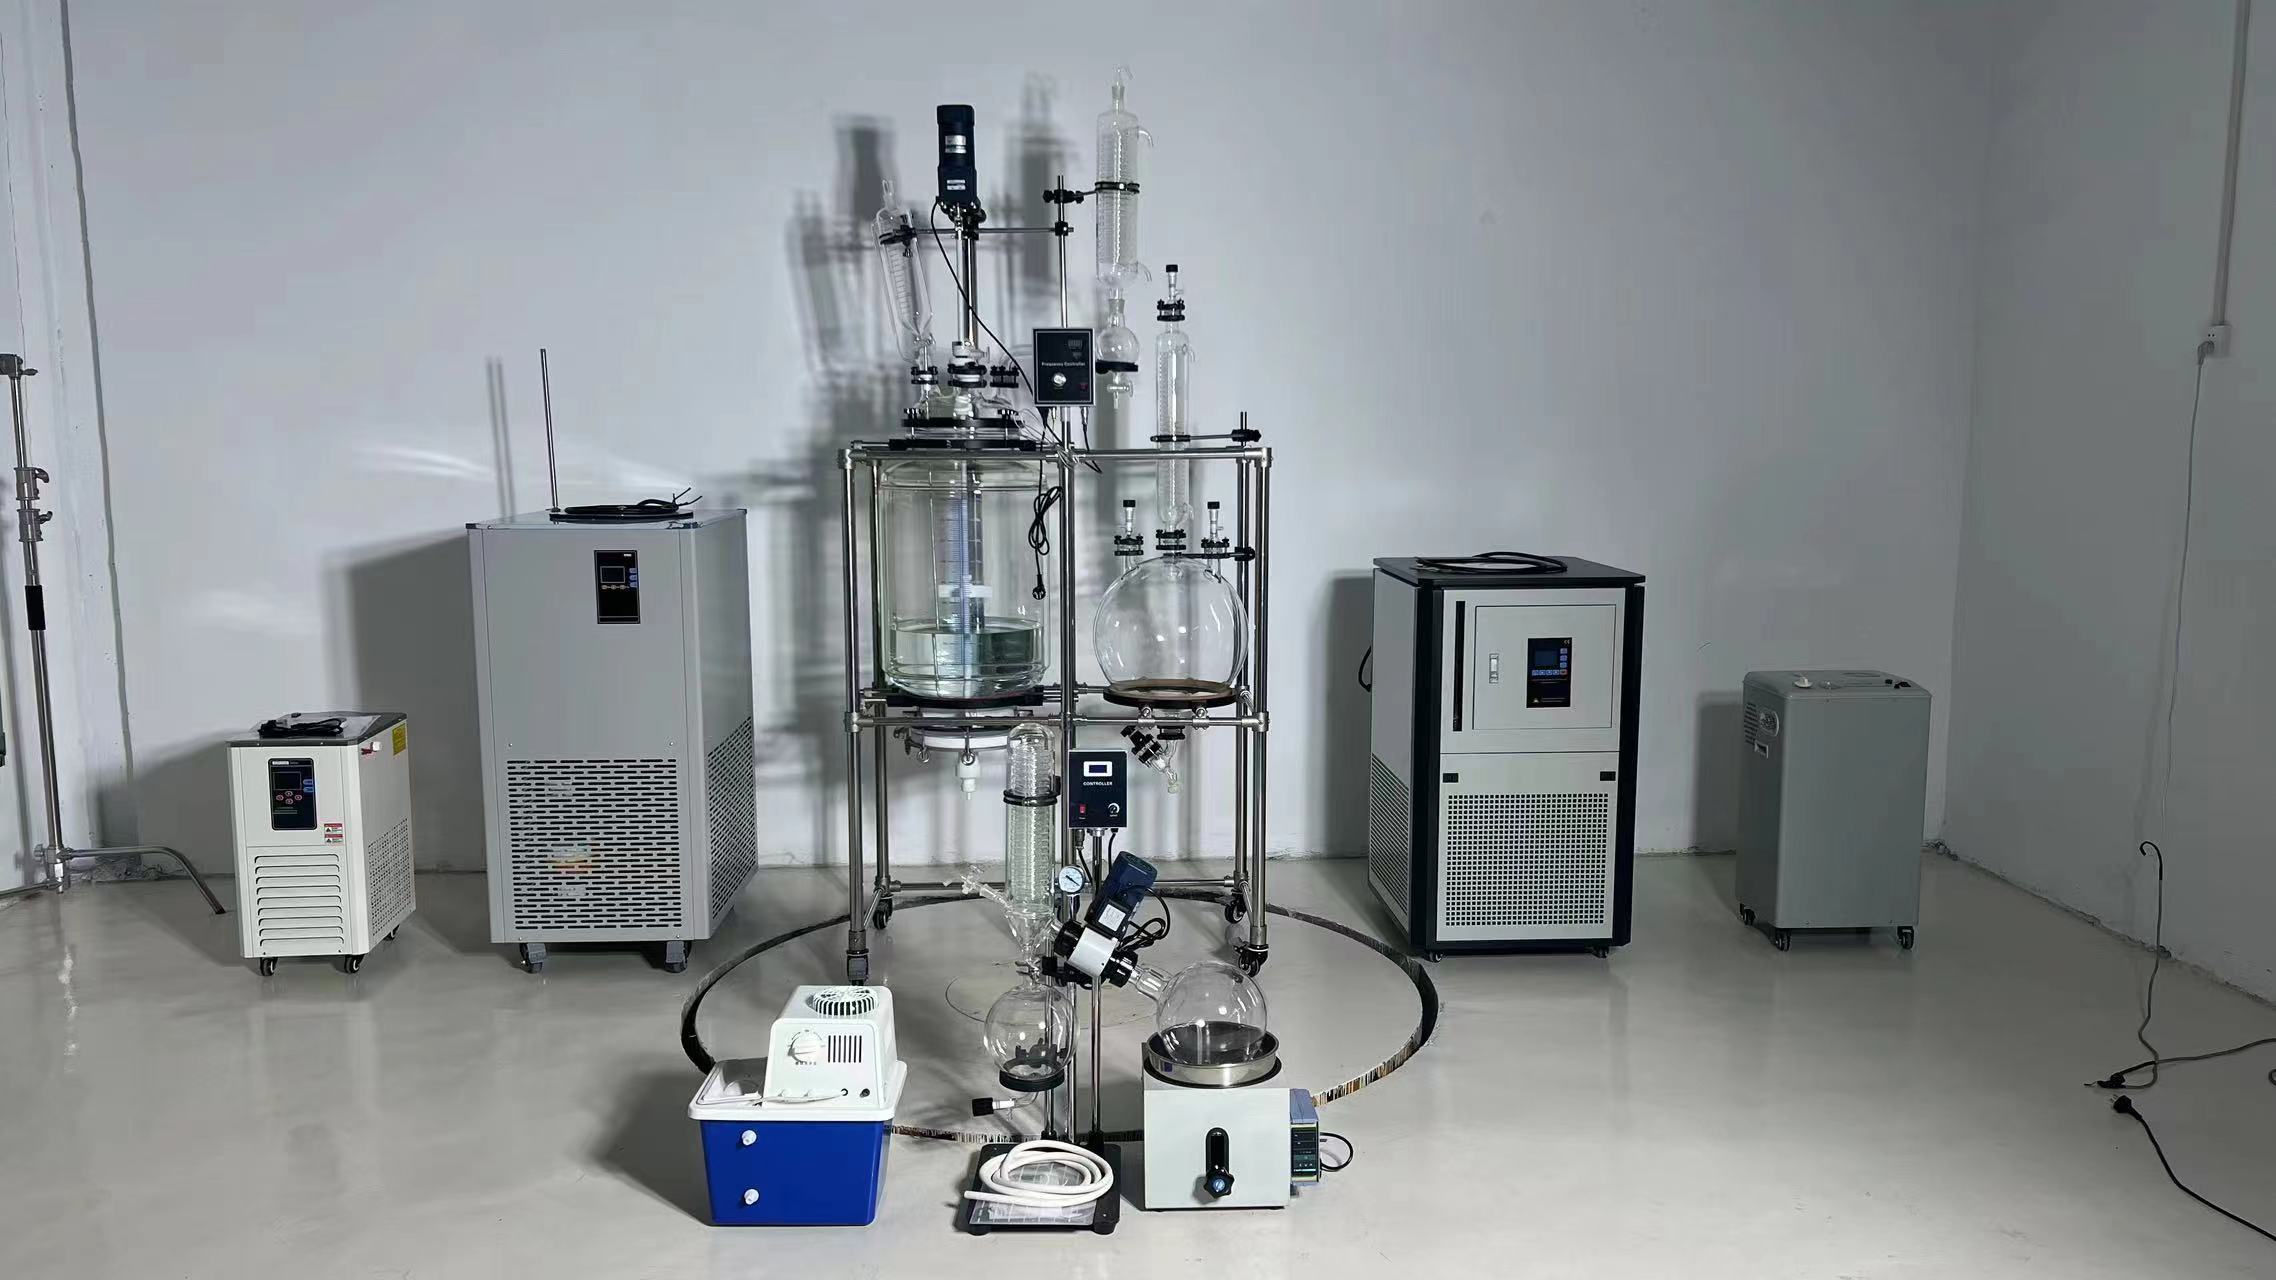 Crystallization reactor (100L) and 5L rotary evaporator.pic